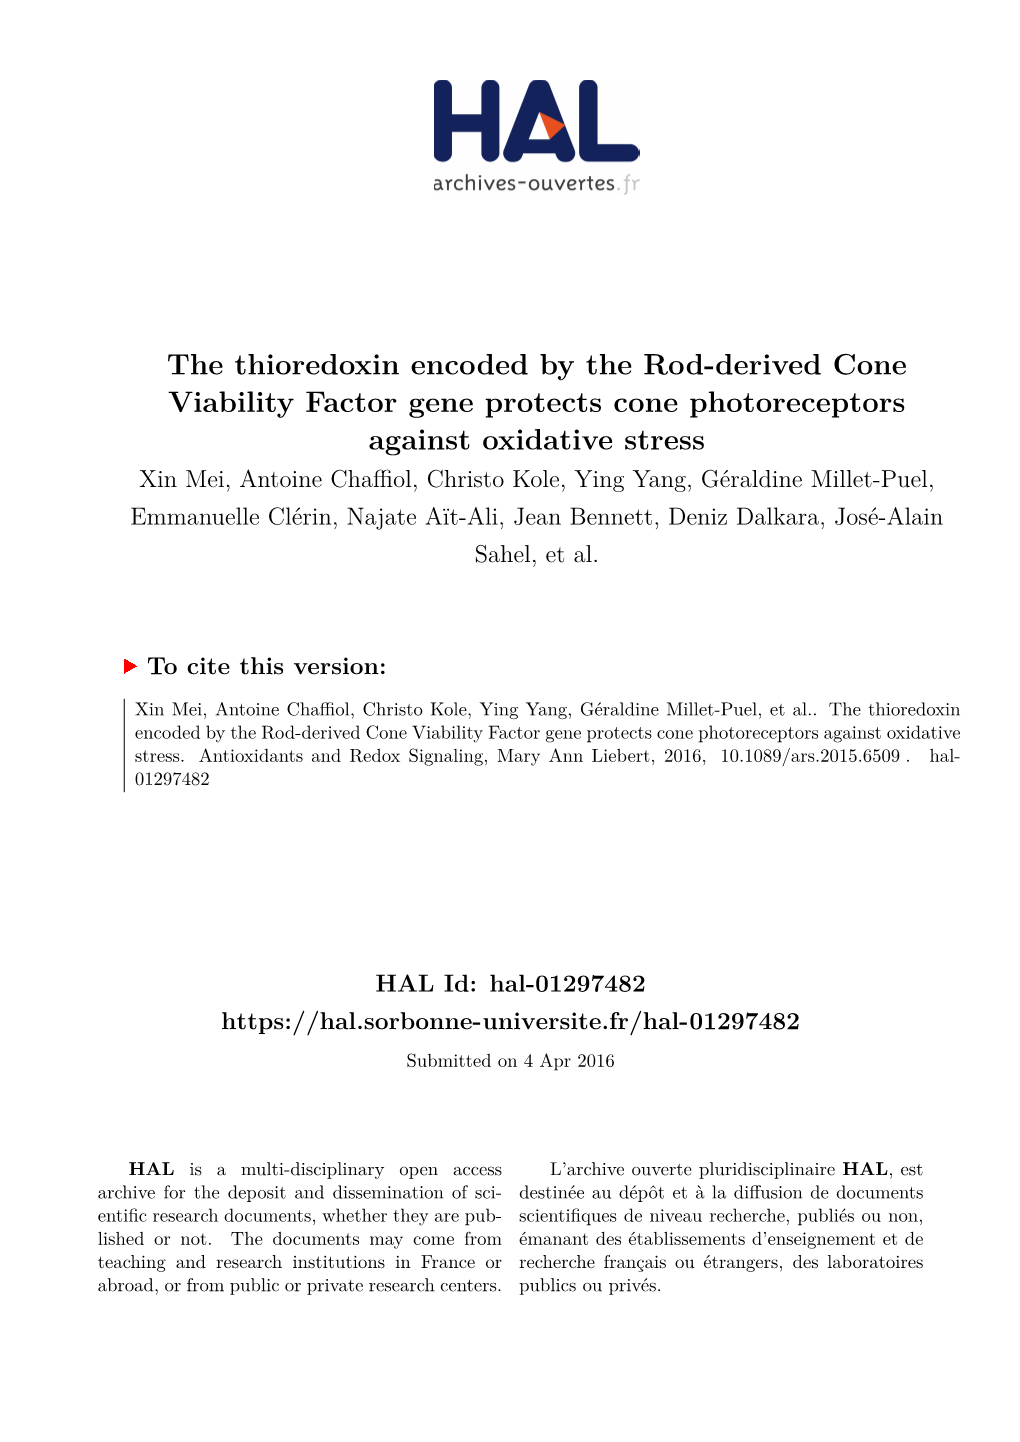 The Thioredoxin Encoded by the Rod-Derived Cone Viability Factor